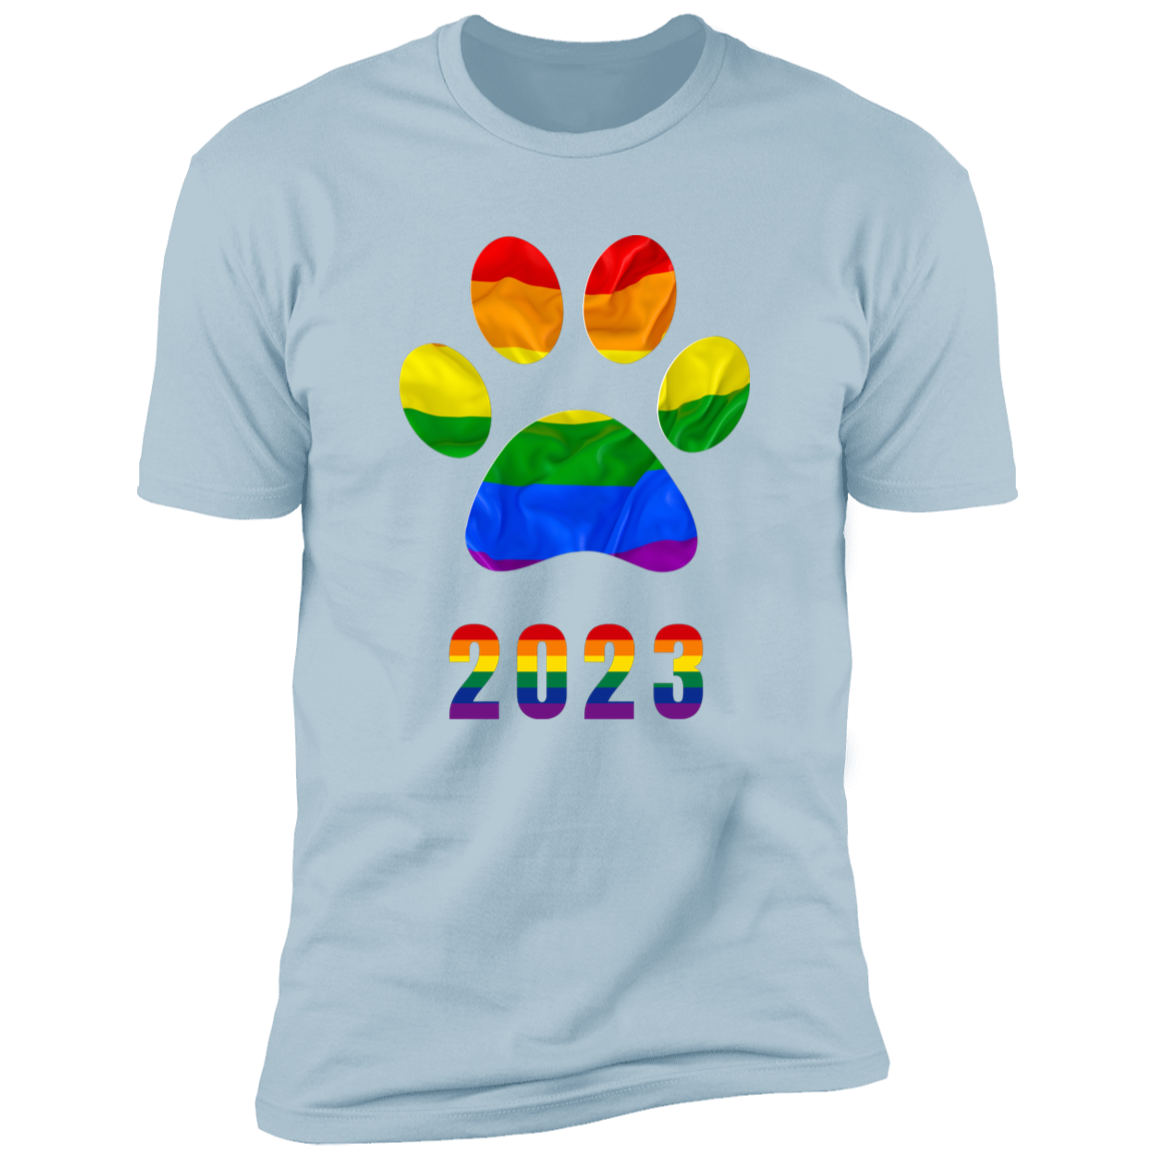 Pride Paw 2023 (Flag) Pride T-shirt, Paw Pride Dog Shirt for humans, in light blue